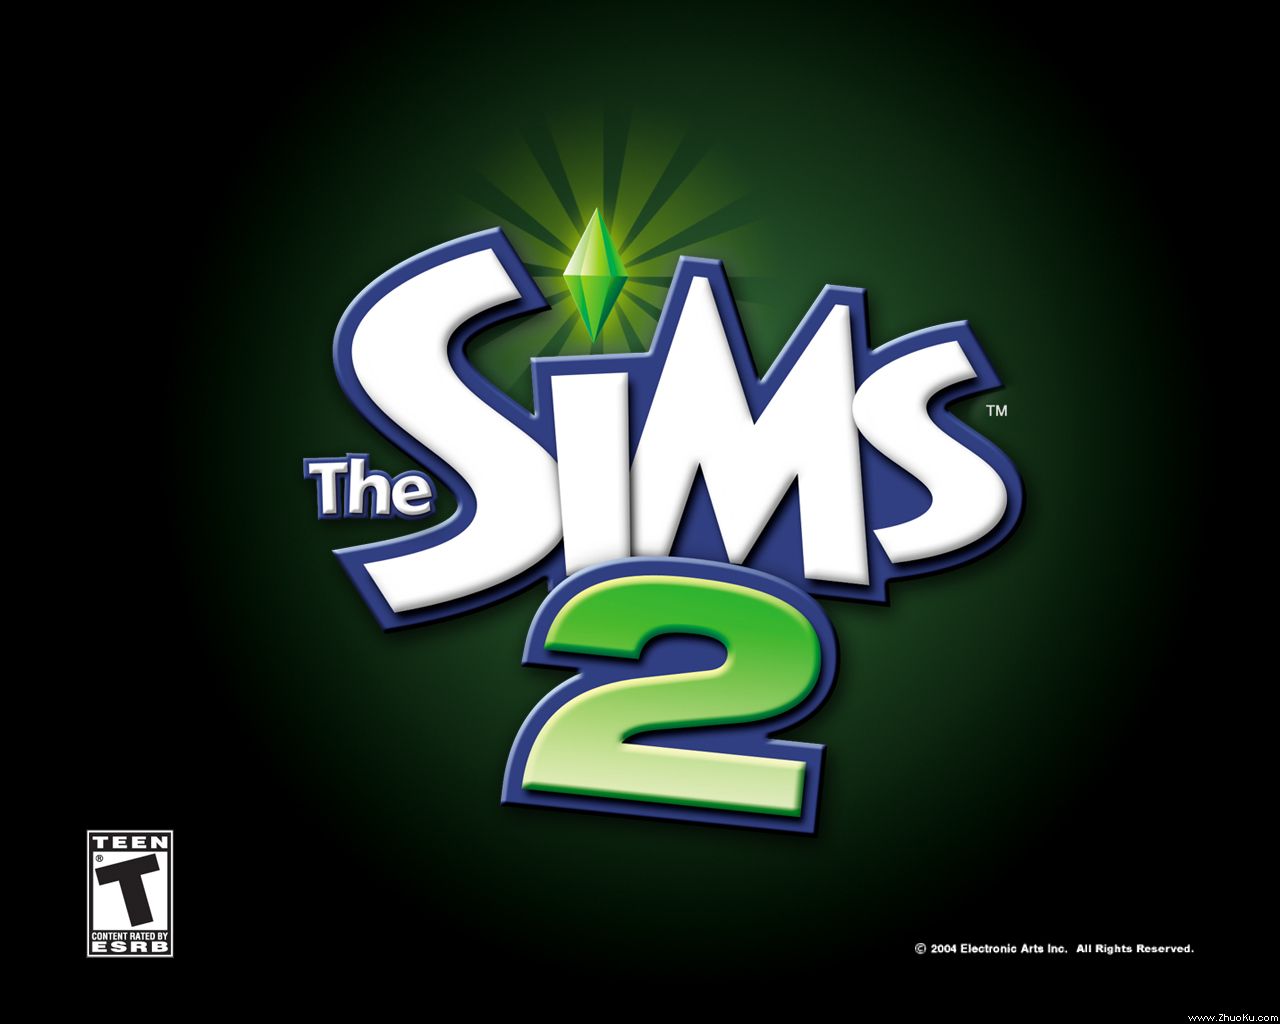 ģ2(The Sims 2)ֽ(ֽ17)